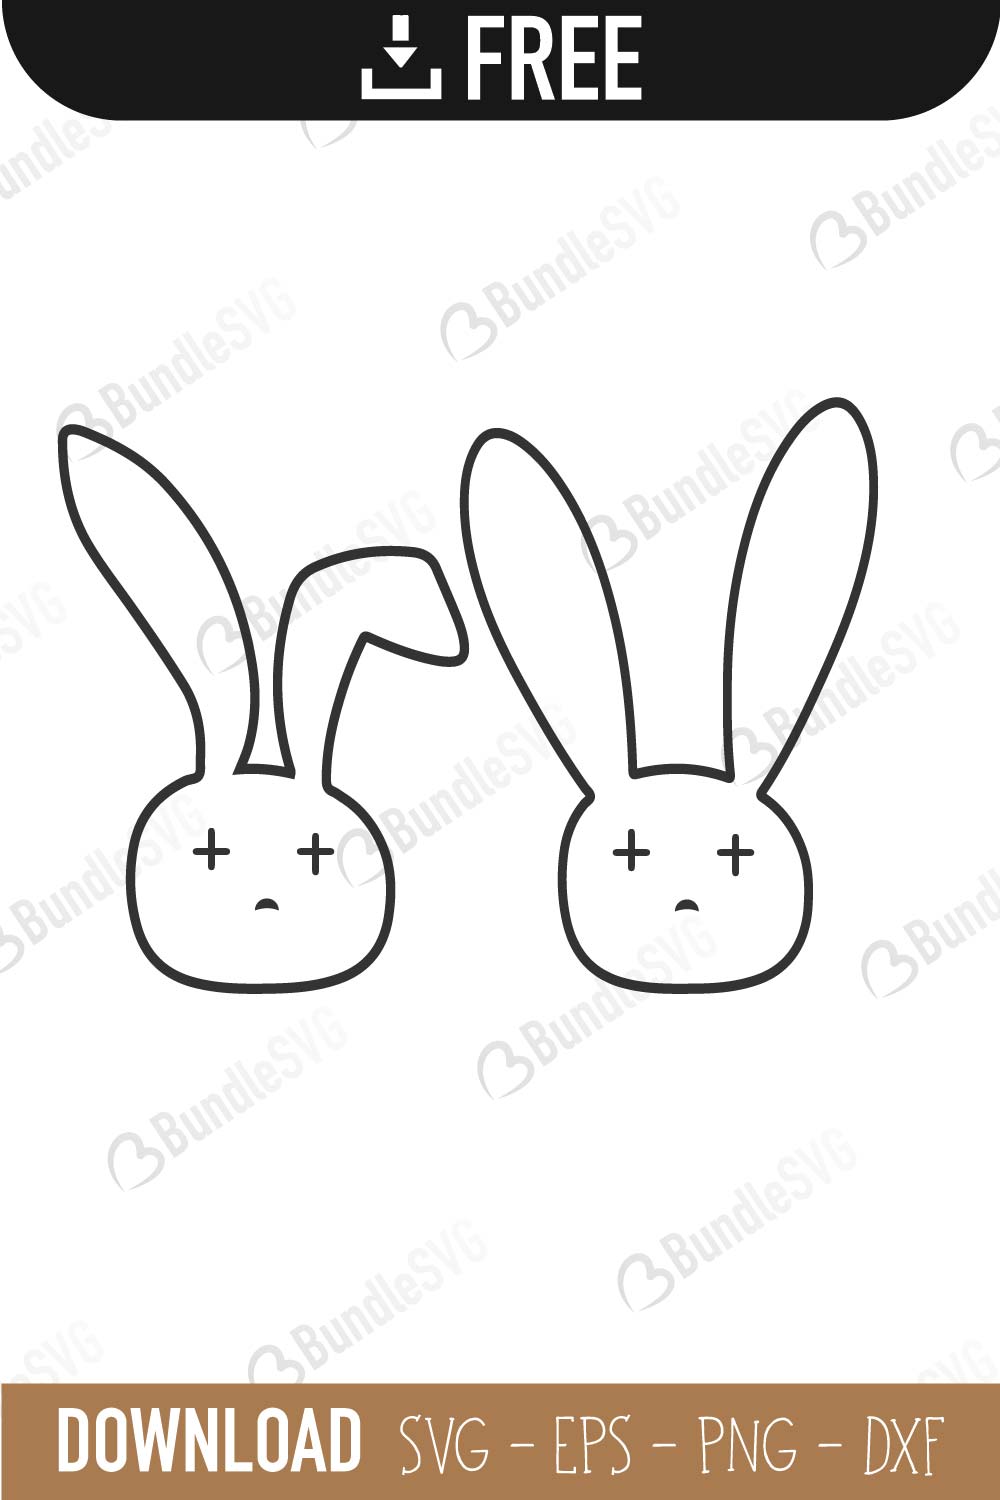 Download Download Bunny Svg Free Pics Free SVG files | Silhouette ...